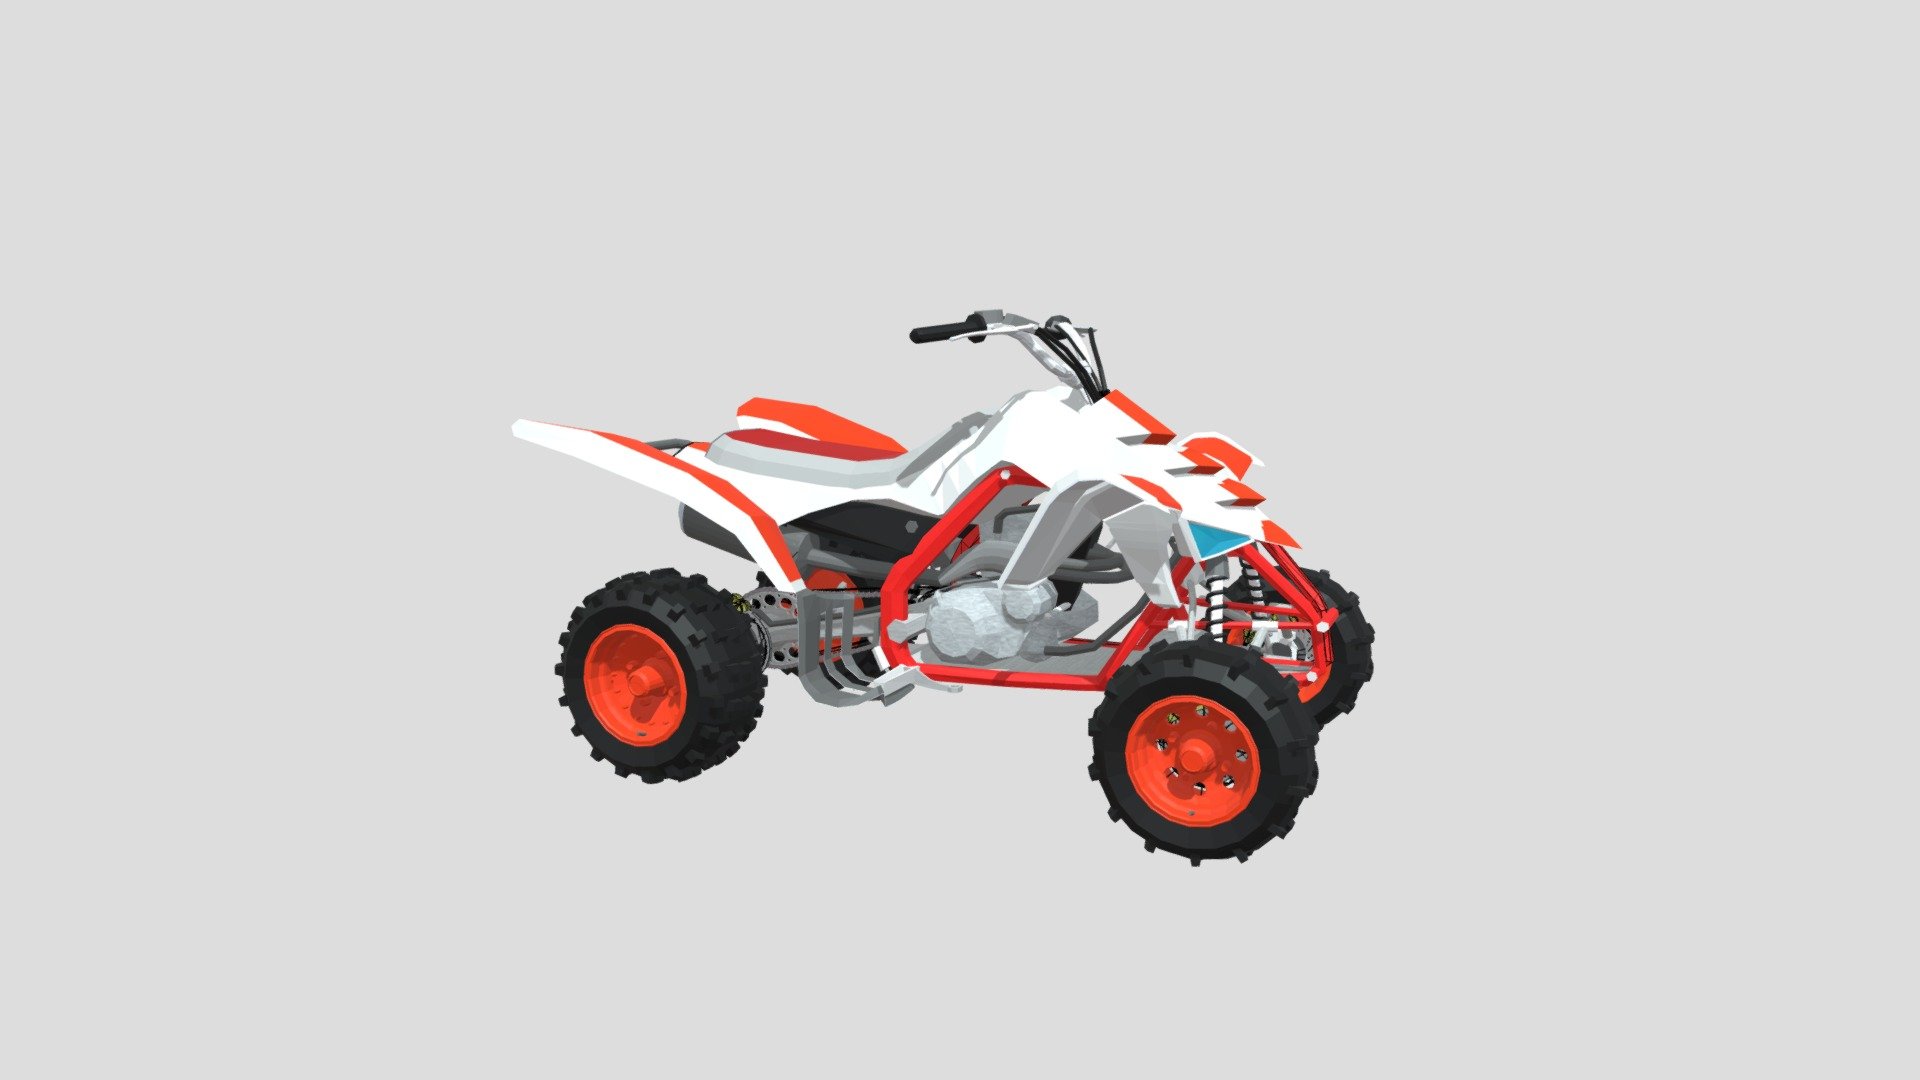 Quad/ATV (All-terrain Vehicle) four-wheeled vehicle similar to a motorcycle, with low-pressure tires, with a seat in which the pilot rides astride him, having handlebars for steering control 3d model